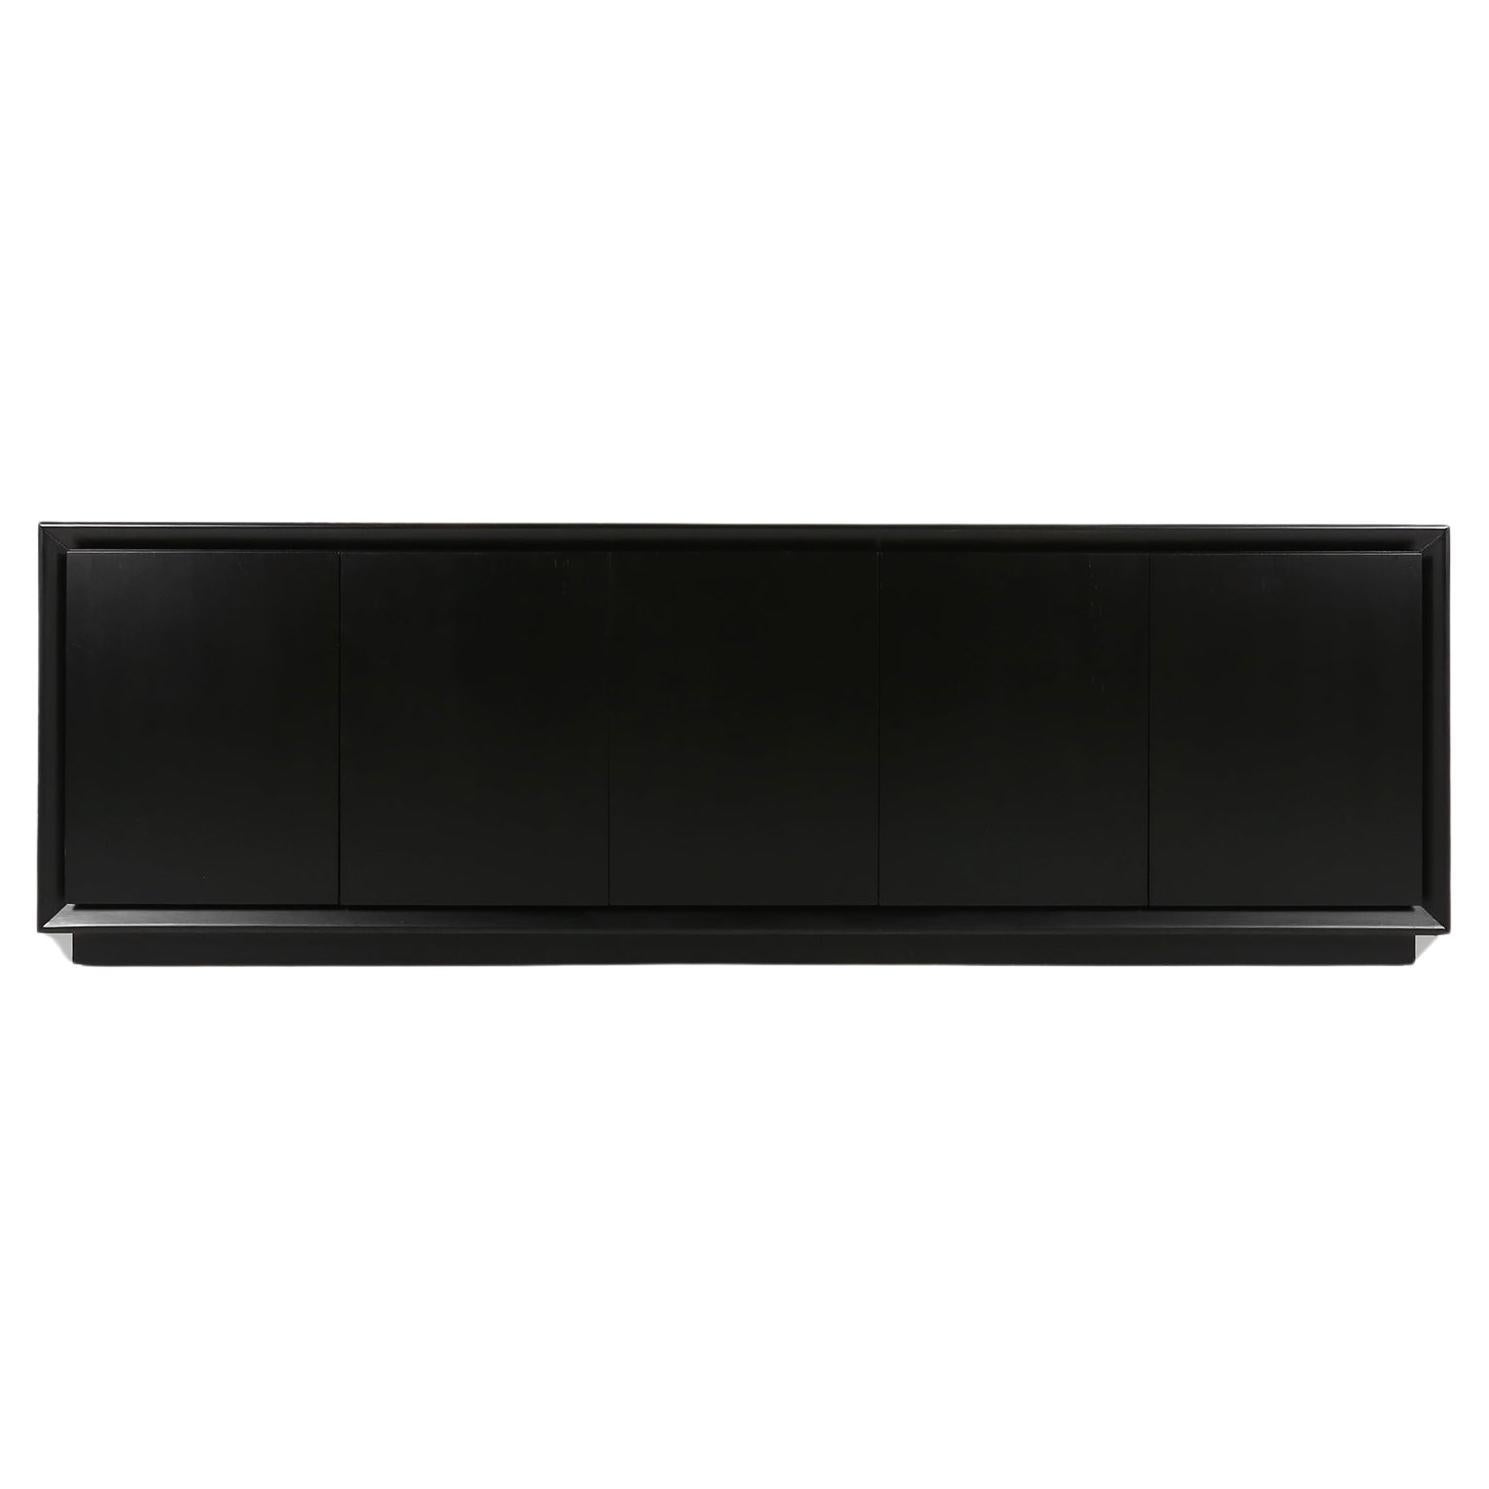 Belgium / 1960s / black lacquered sideboard / mid-century / vintage / design

This Belgium black sideboard from the 1960s is a stunning piece that exudes elegance and sophistication. Crafted from high-quality wood, this sideboard is not only